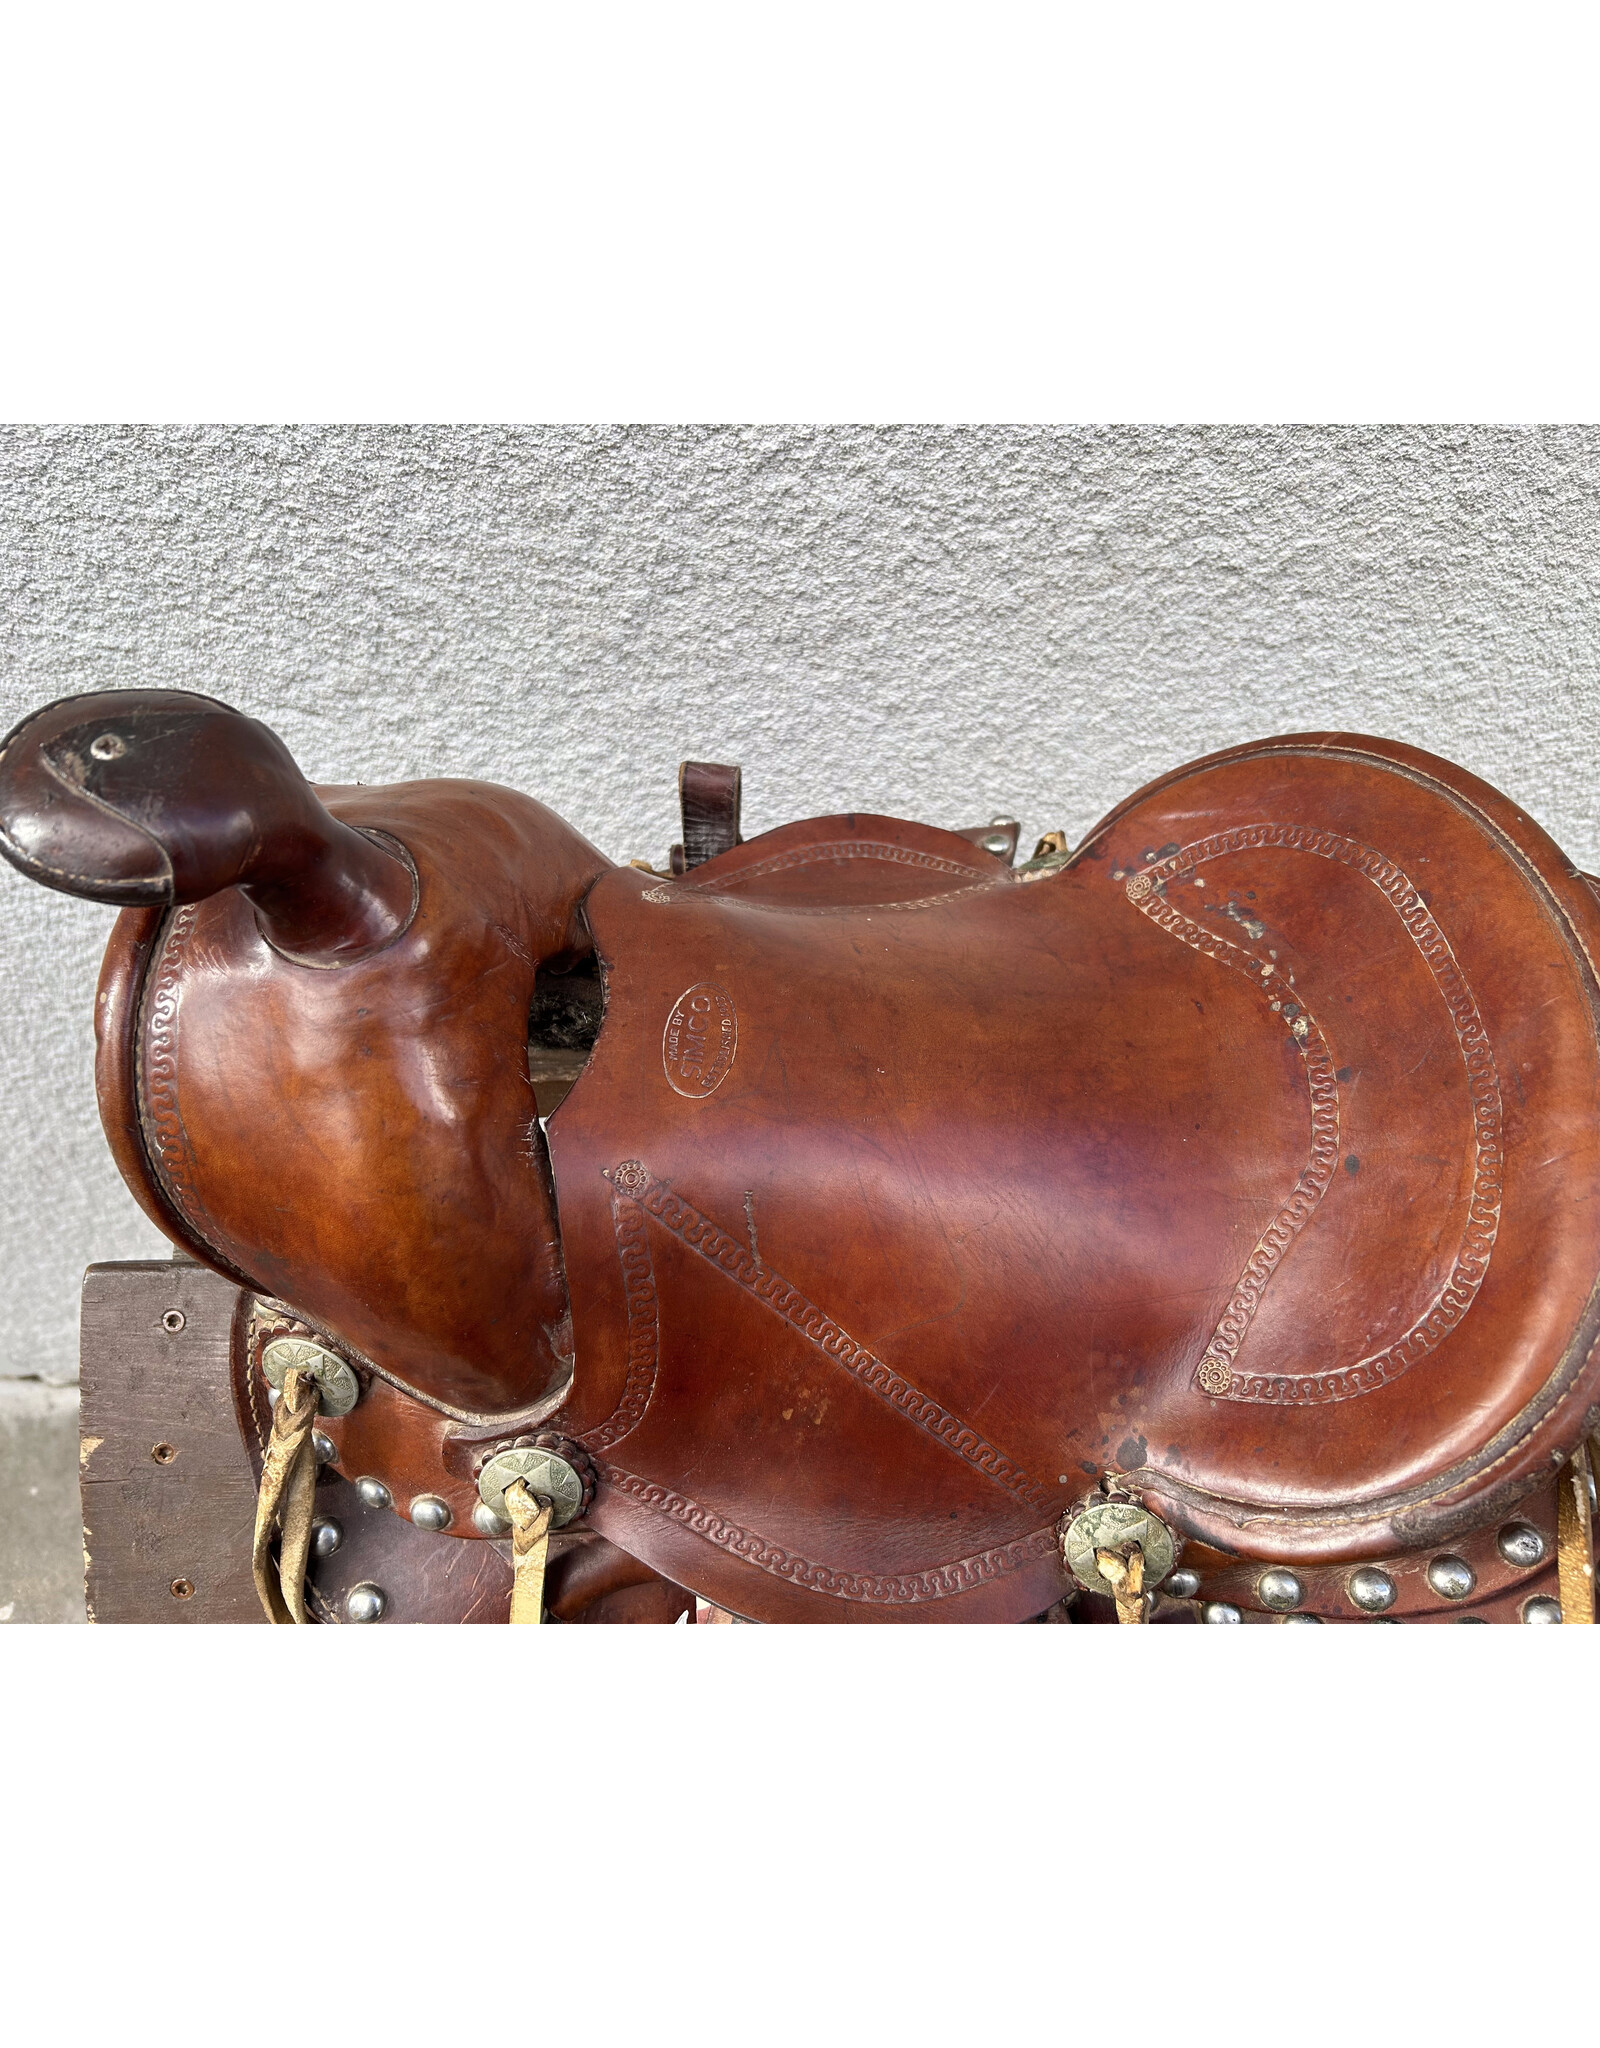 Kids Simco Western Saddle 12" with Tapaderos and Grommets